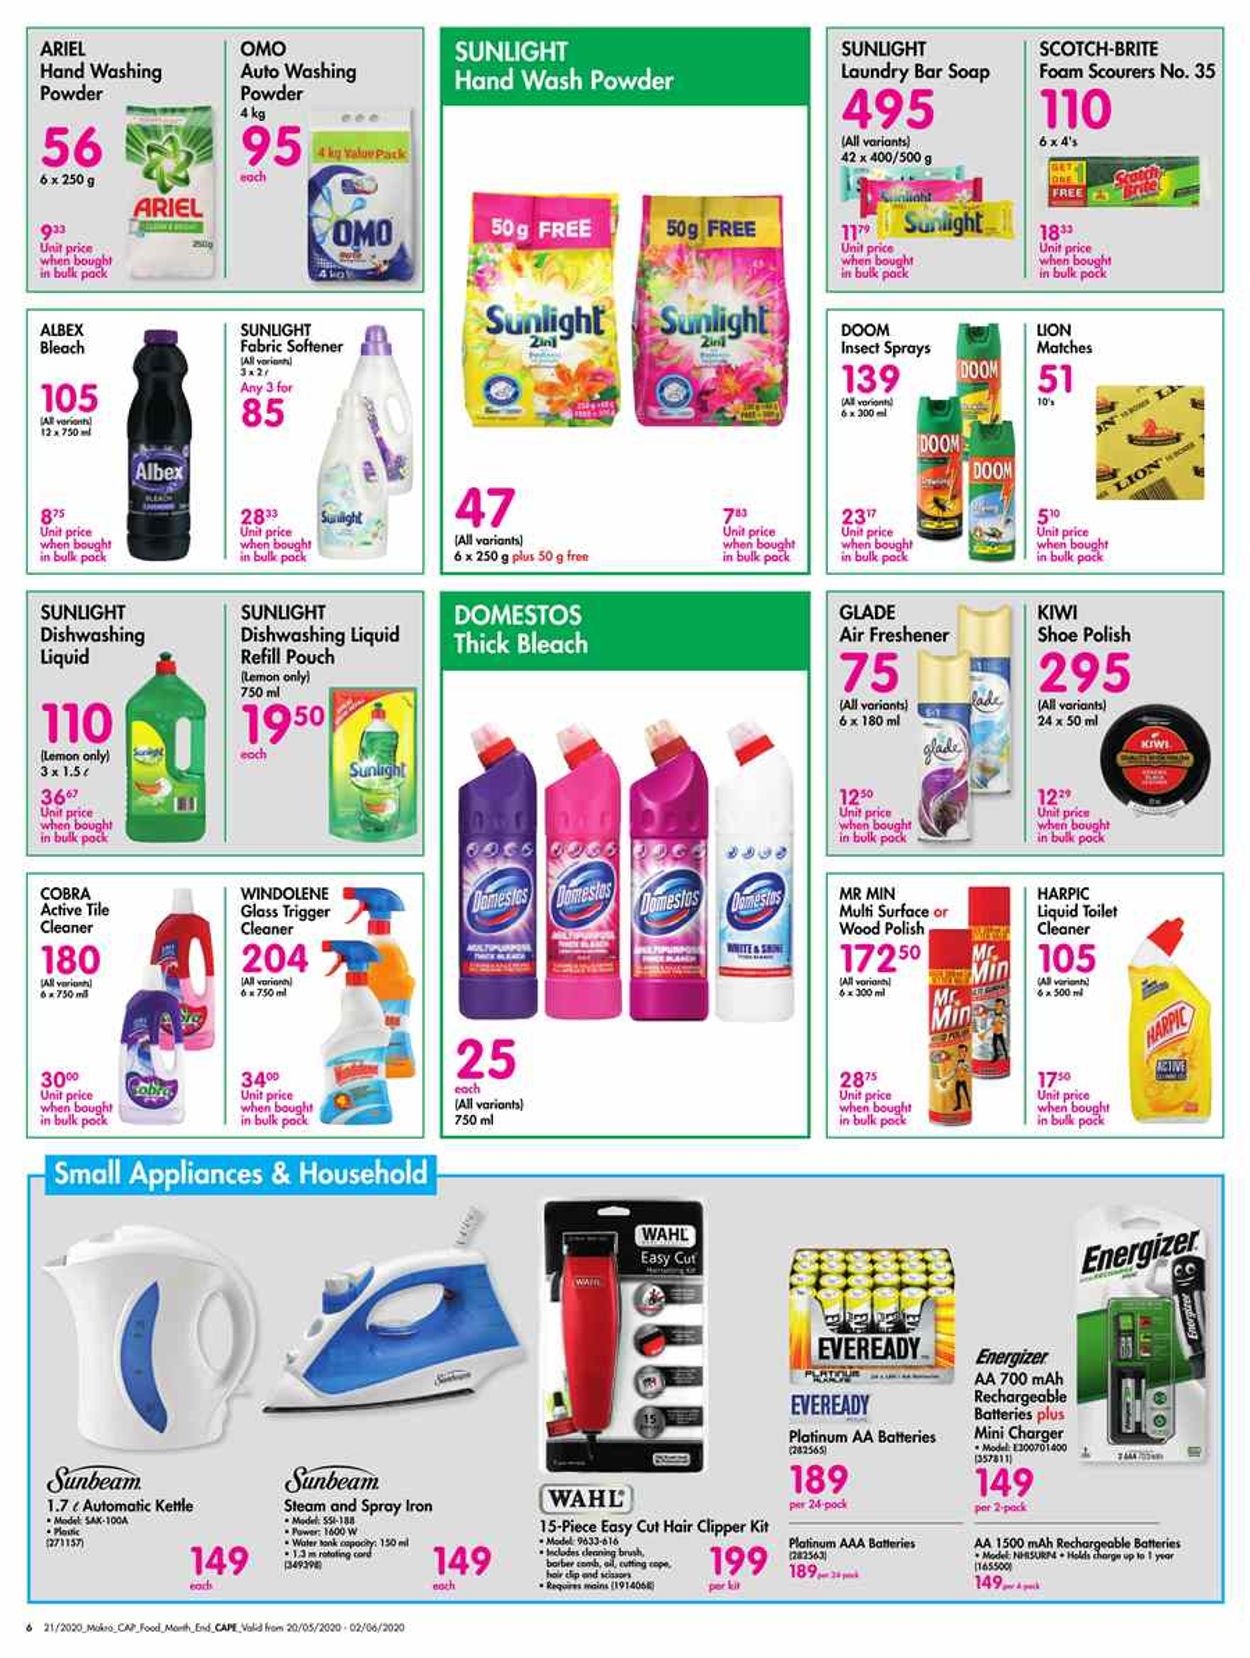 Makro Catalogue from 2020/05/20